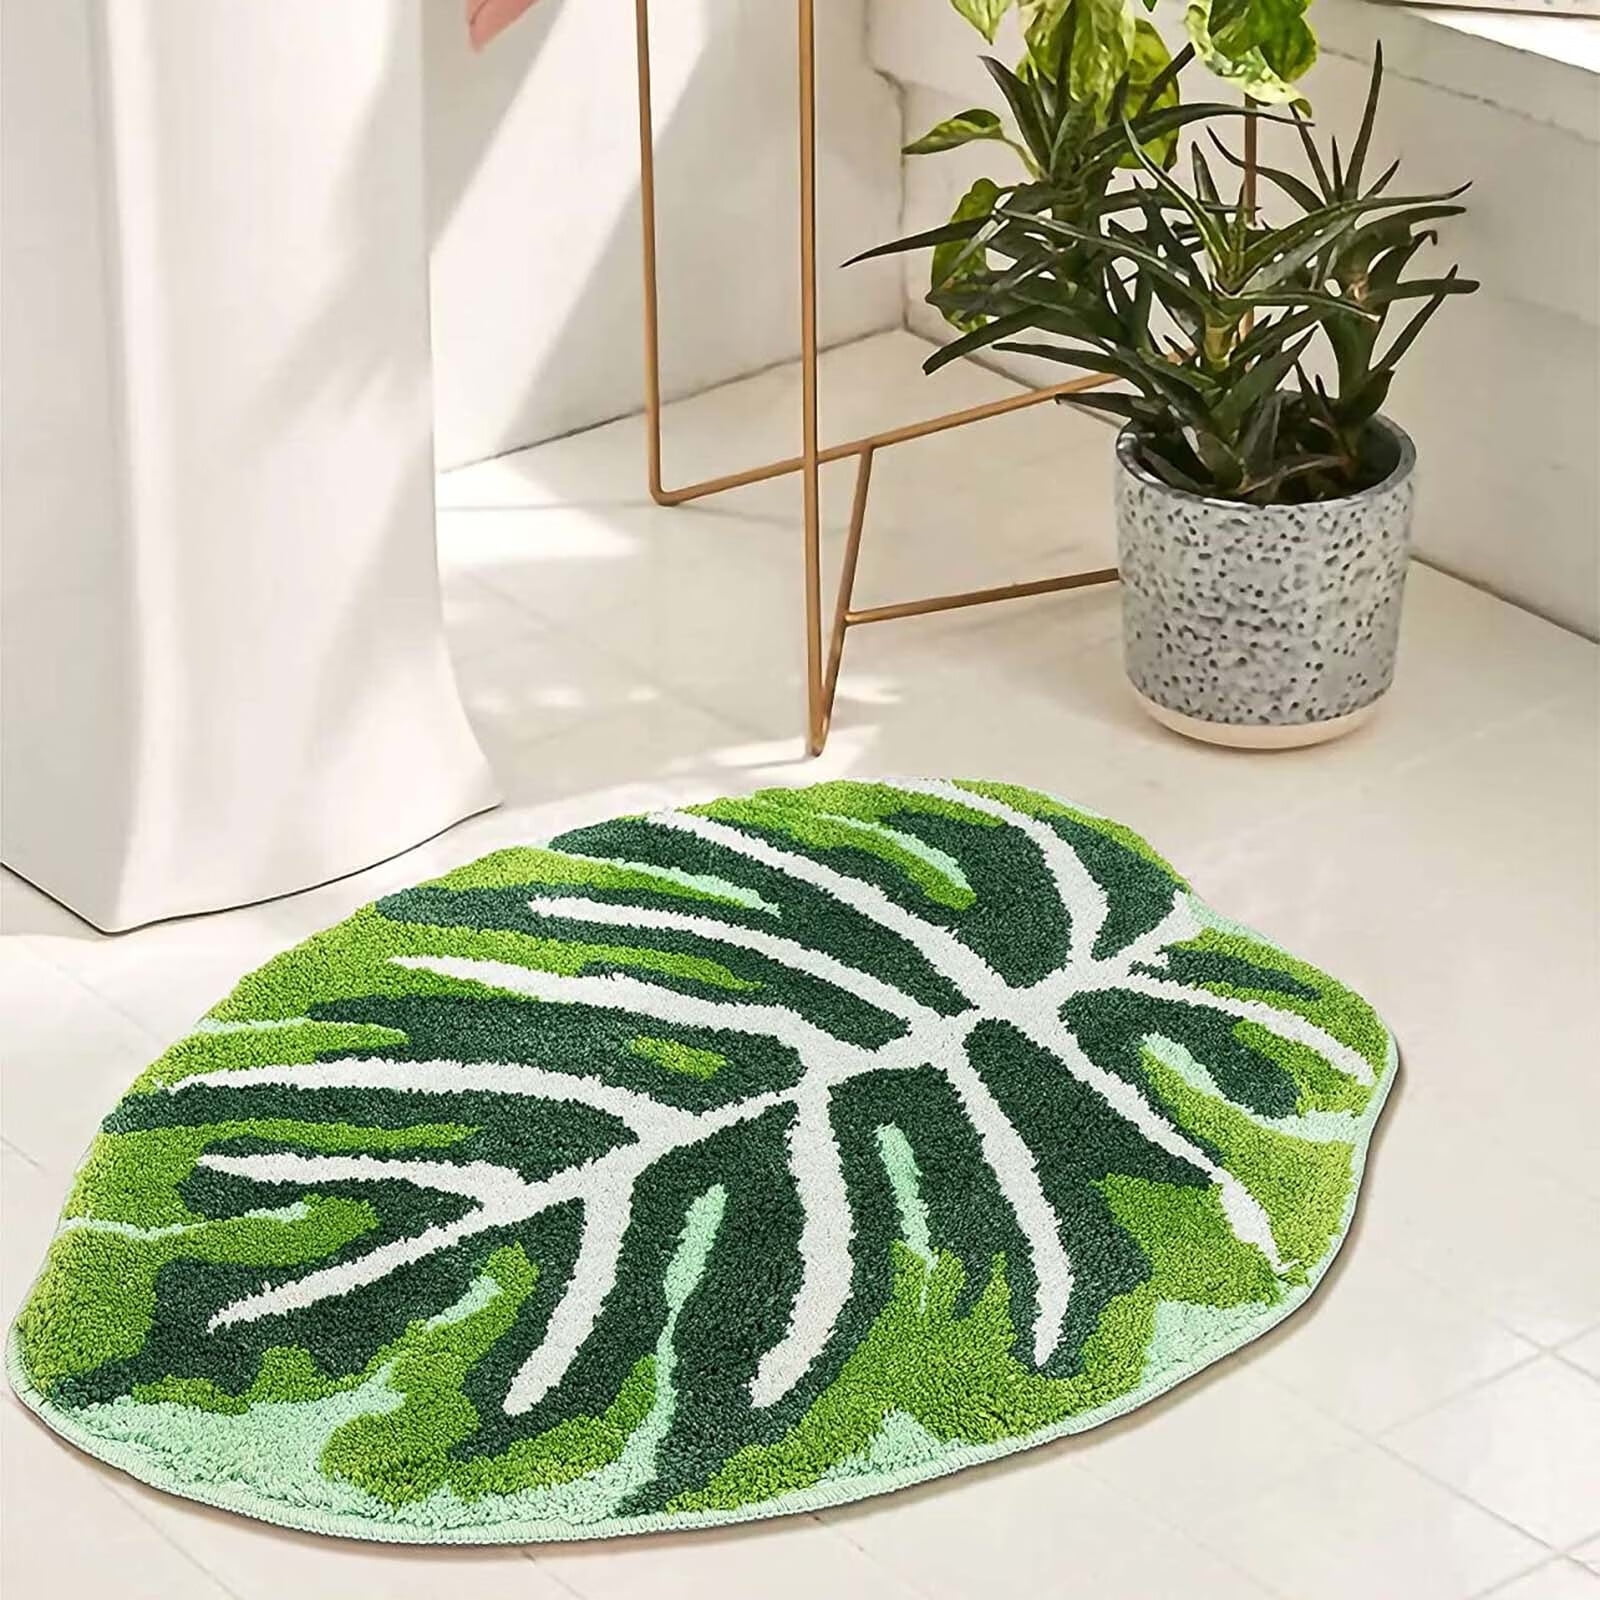  Color&Geometry Green Bathroom Rugs- Non Slip, Absorbent, Thick,  Soft, Washable Bath Mat, 16x24 Small Bath Rug Bath Mats for Bathroom  Floor, Shower, Sink, Vanity : Home & Kitchen